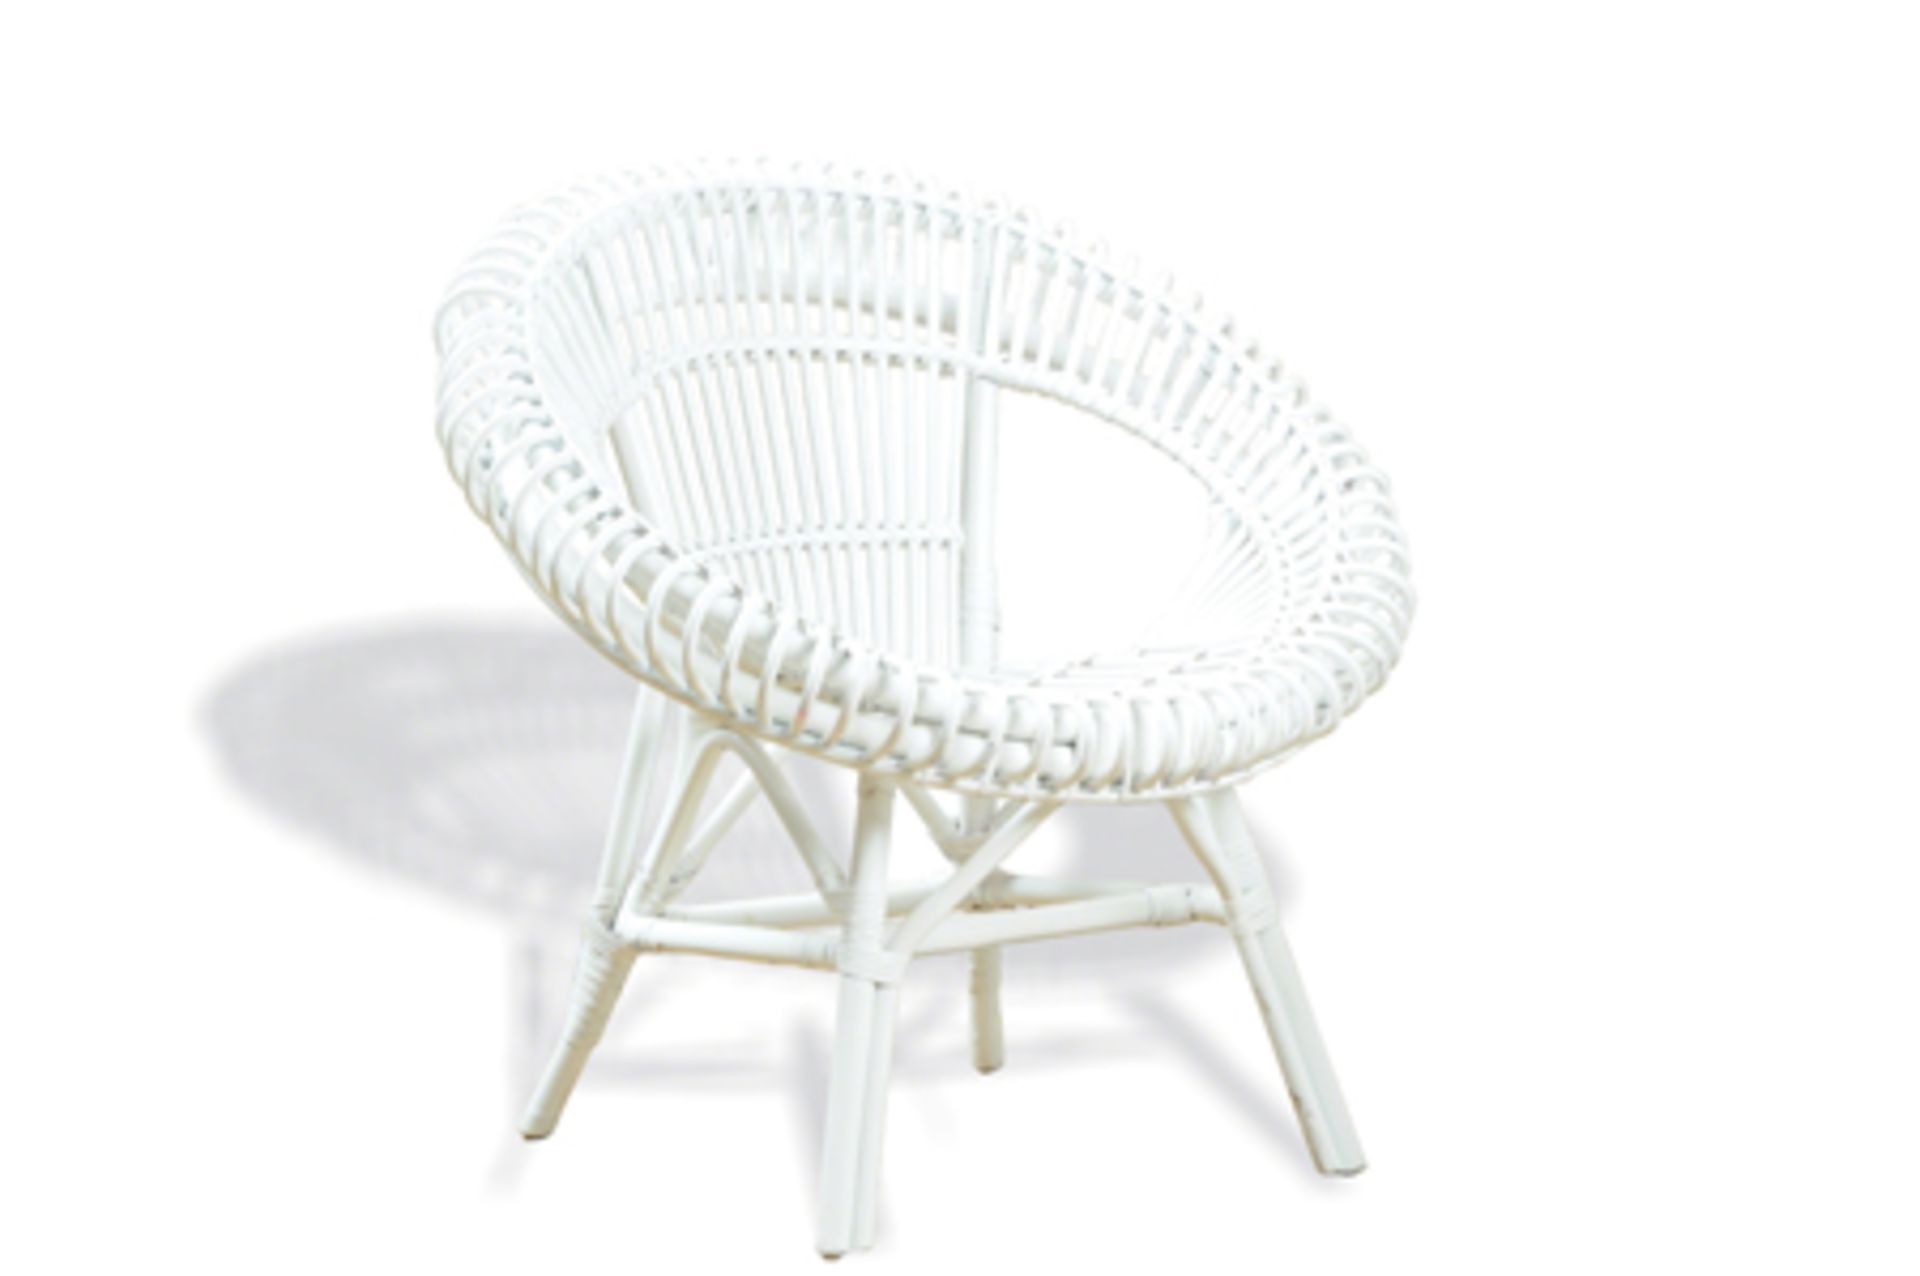 Matahari Chair White (sold without cushion) a rattan chair made from natural rattan material - Image 2 of 3